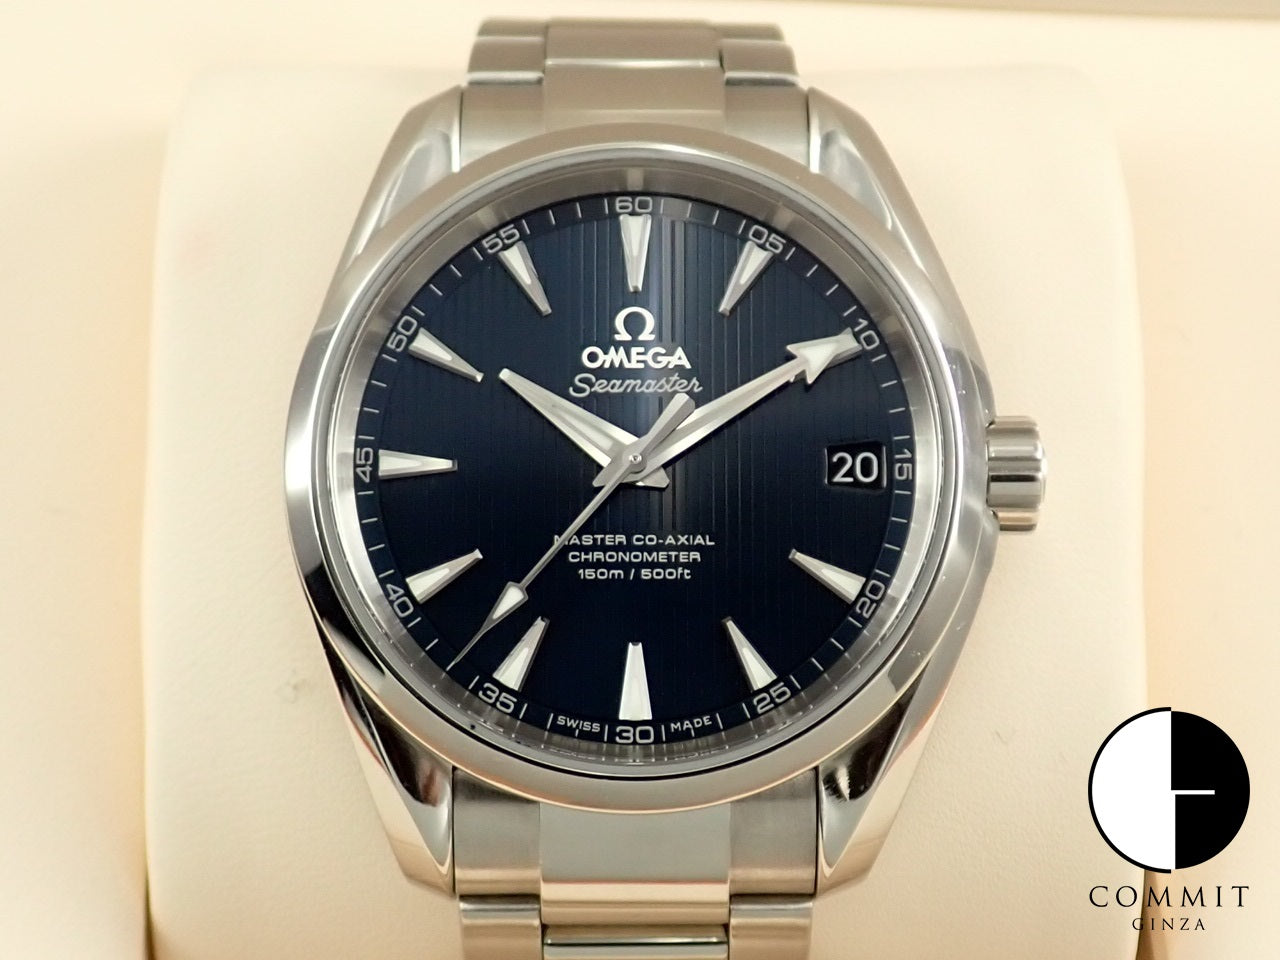 Omega Seamaster Aqua Terra Master Co-Axial Chronometer &lt;Warranty Box and Others&gt;